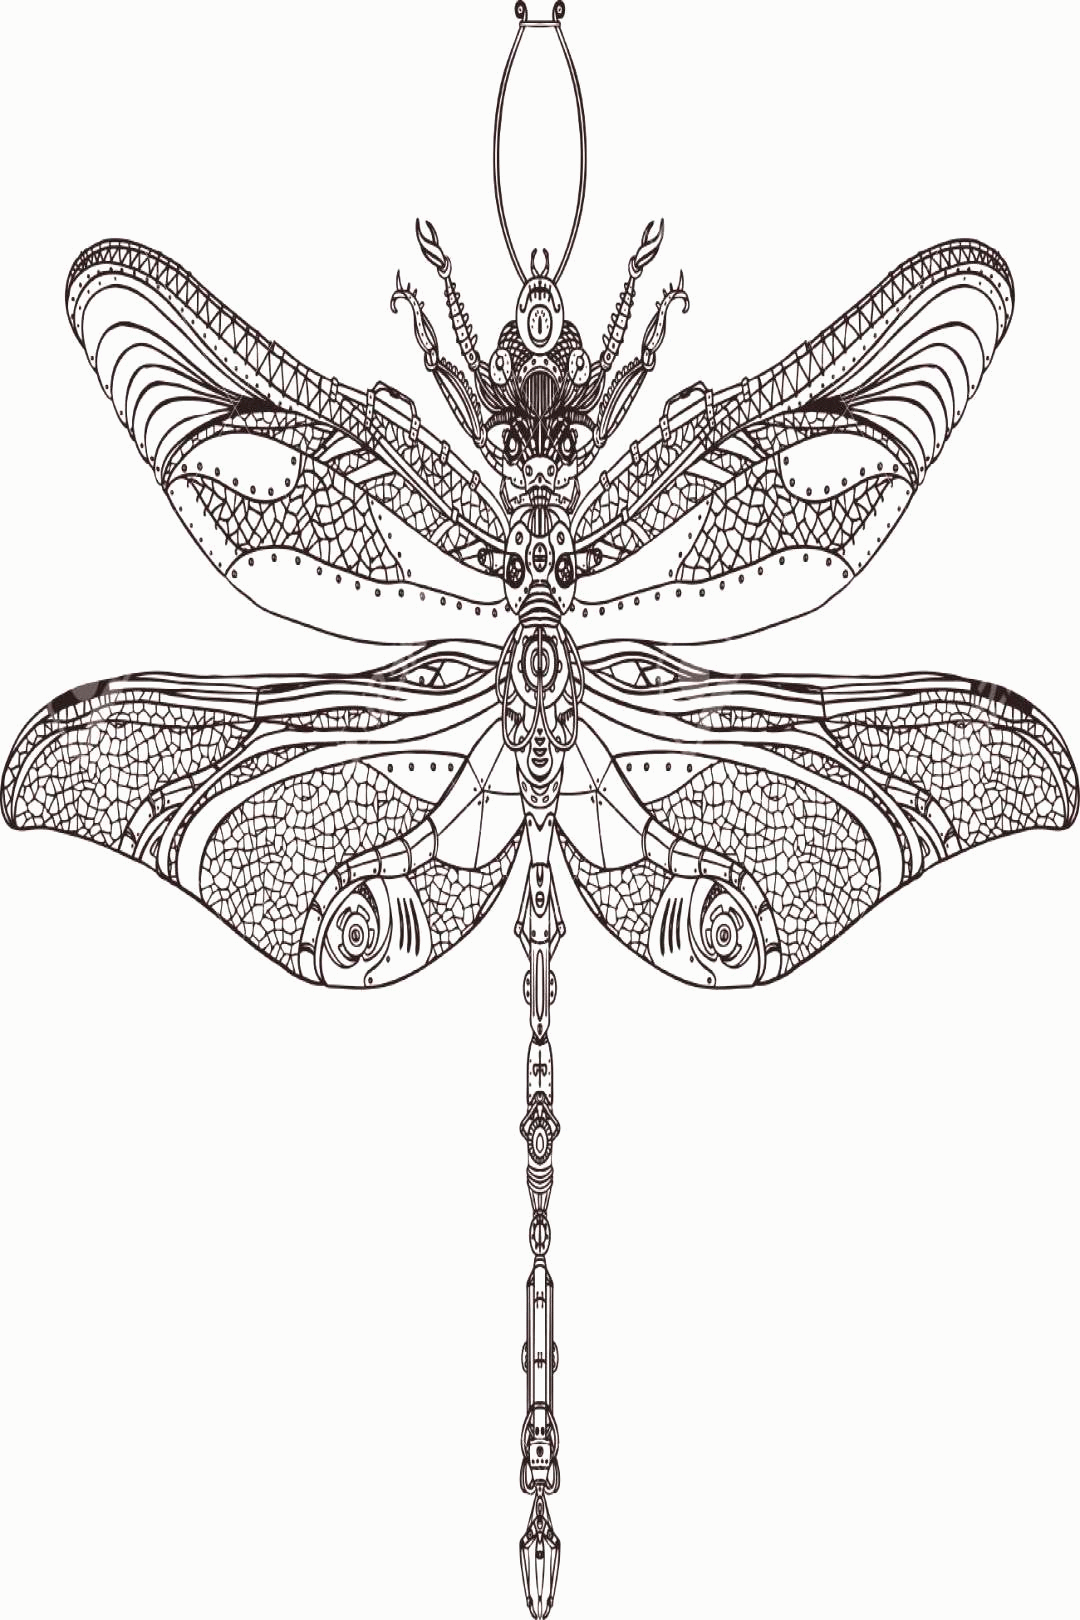 abstract animal steampunk dragonfly illustration dragonfly illustration steampunk tattoo medium